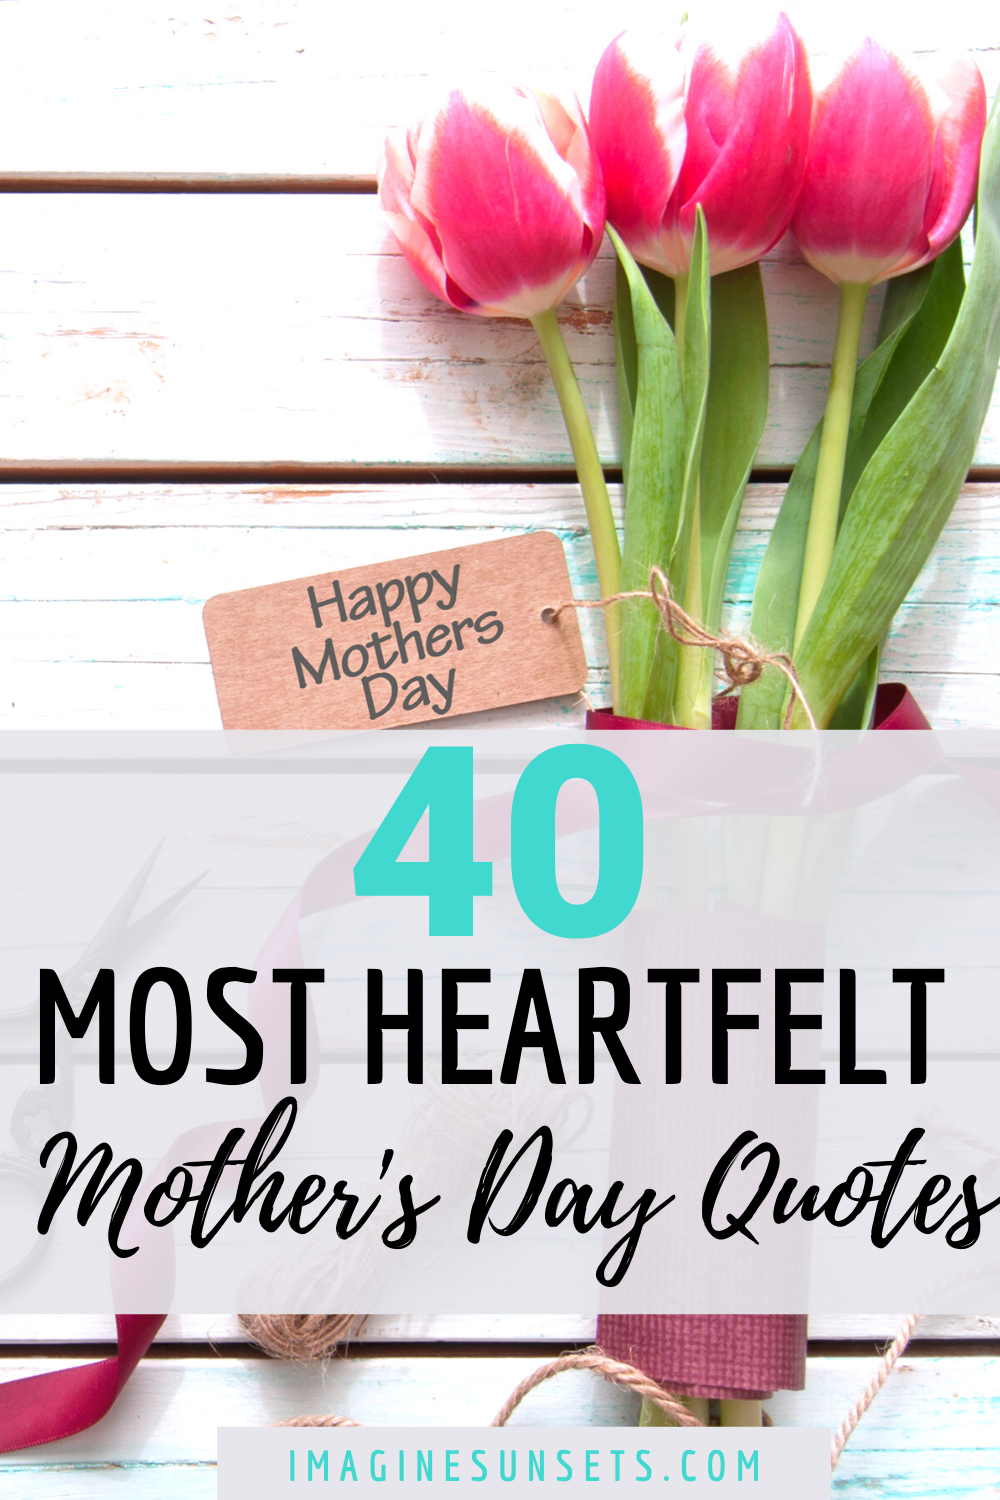 40 mother's day quotes that describe the beauty of motherhood